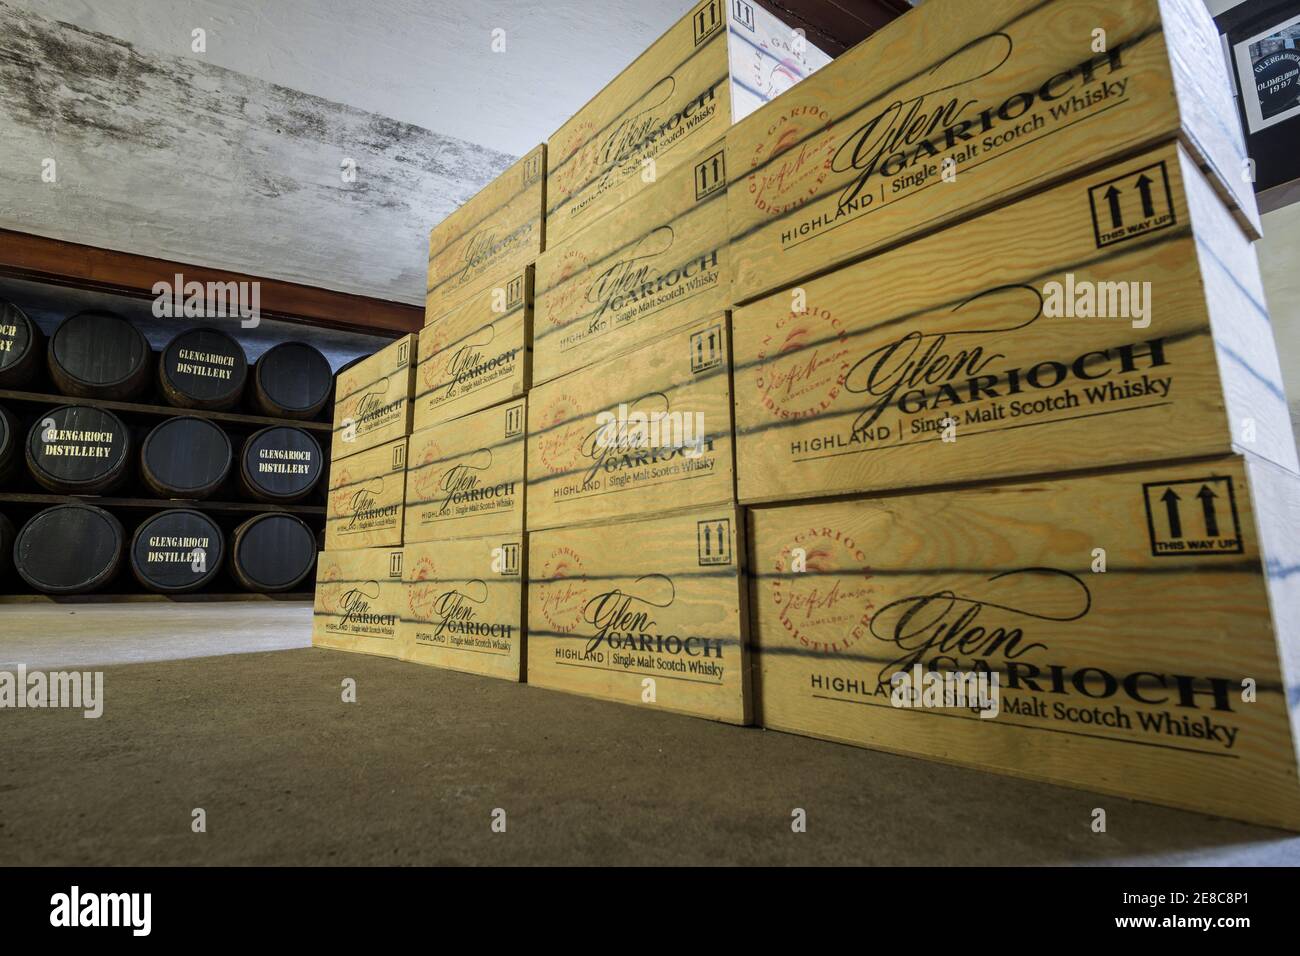 Whisky barrels and crates in the warehouse at Glen Garioch distillery, near Inverurie, Aberdeenshire, Scotland Stock Photo